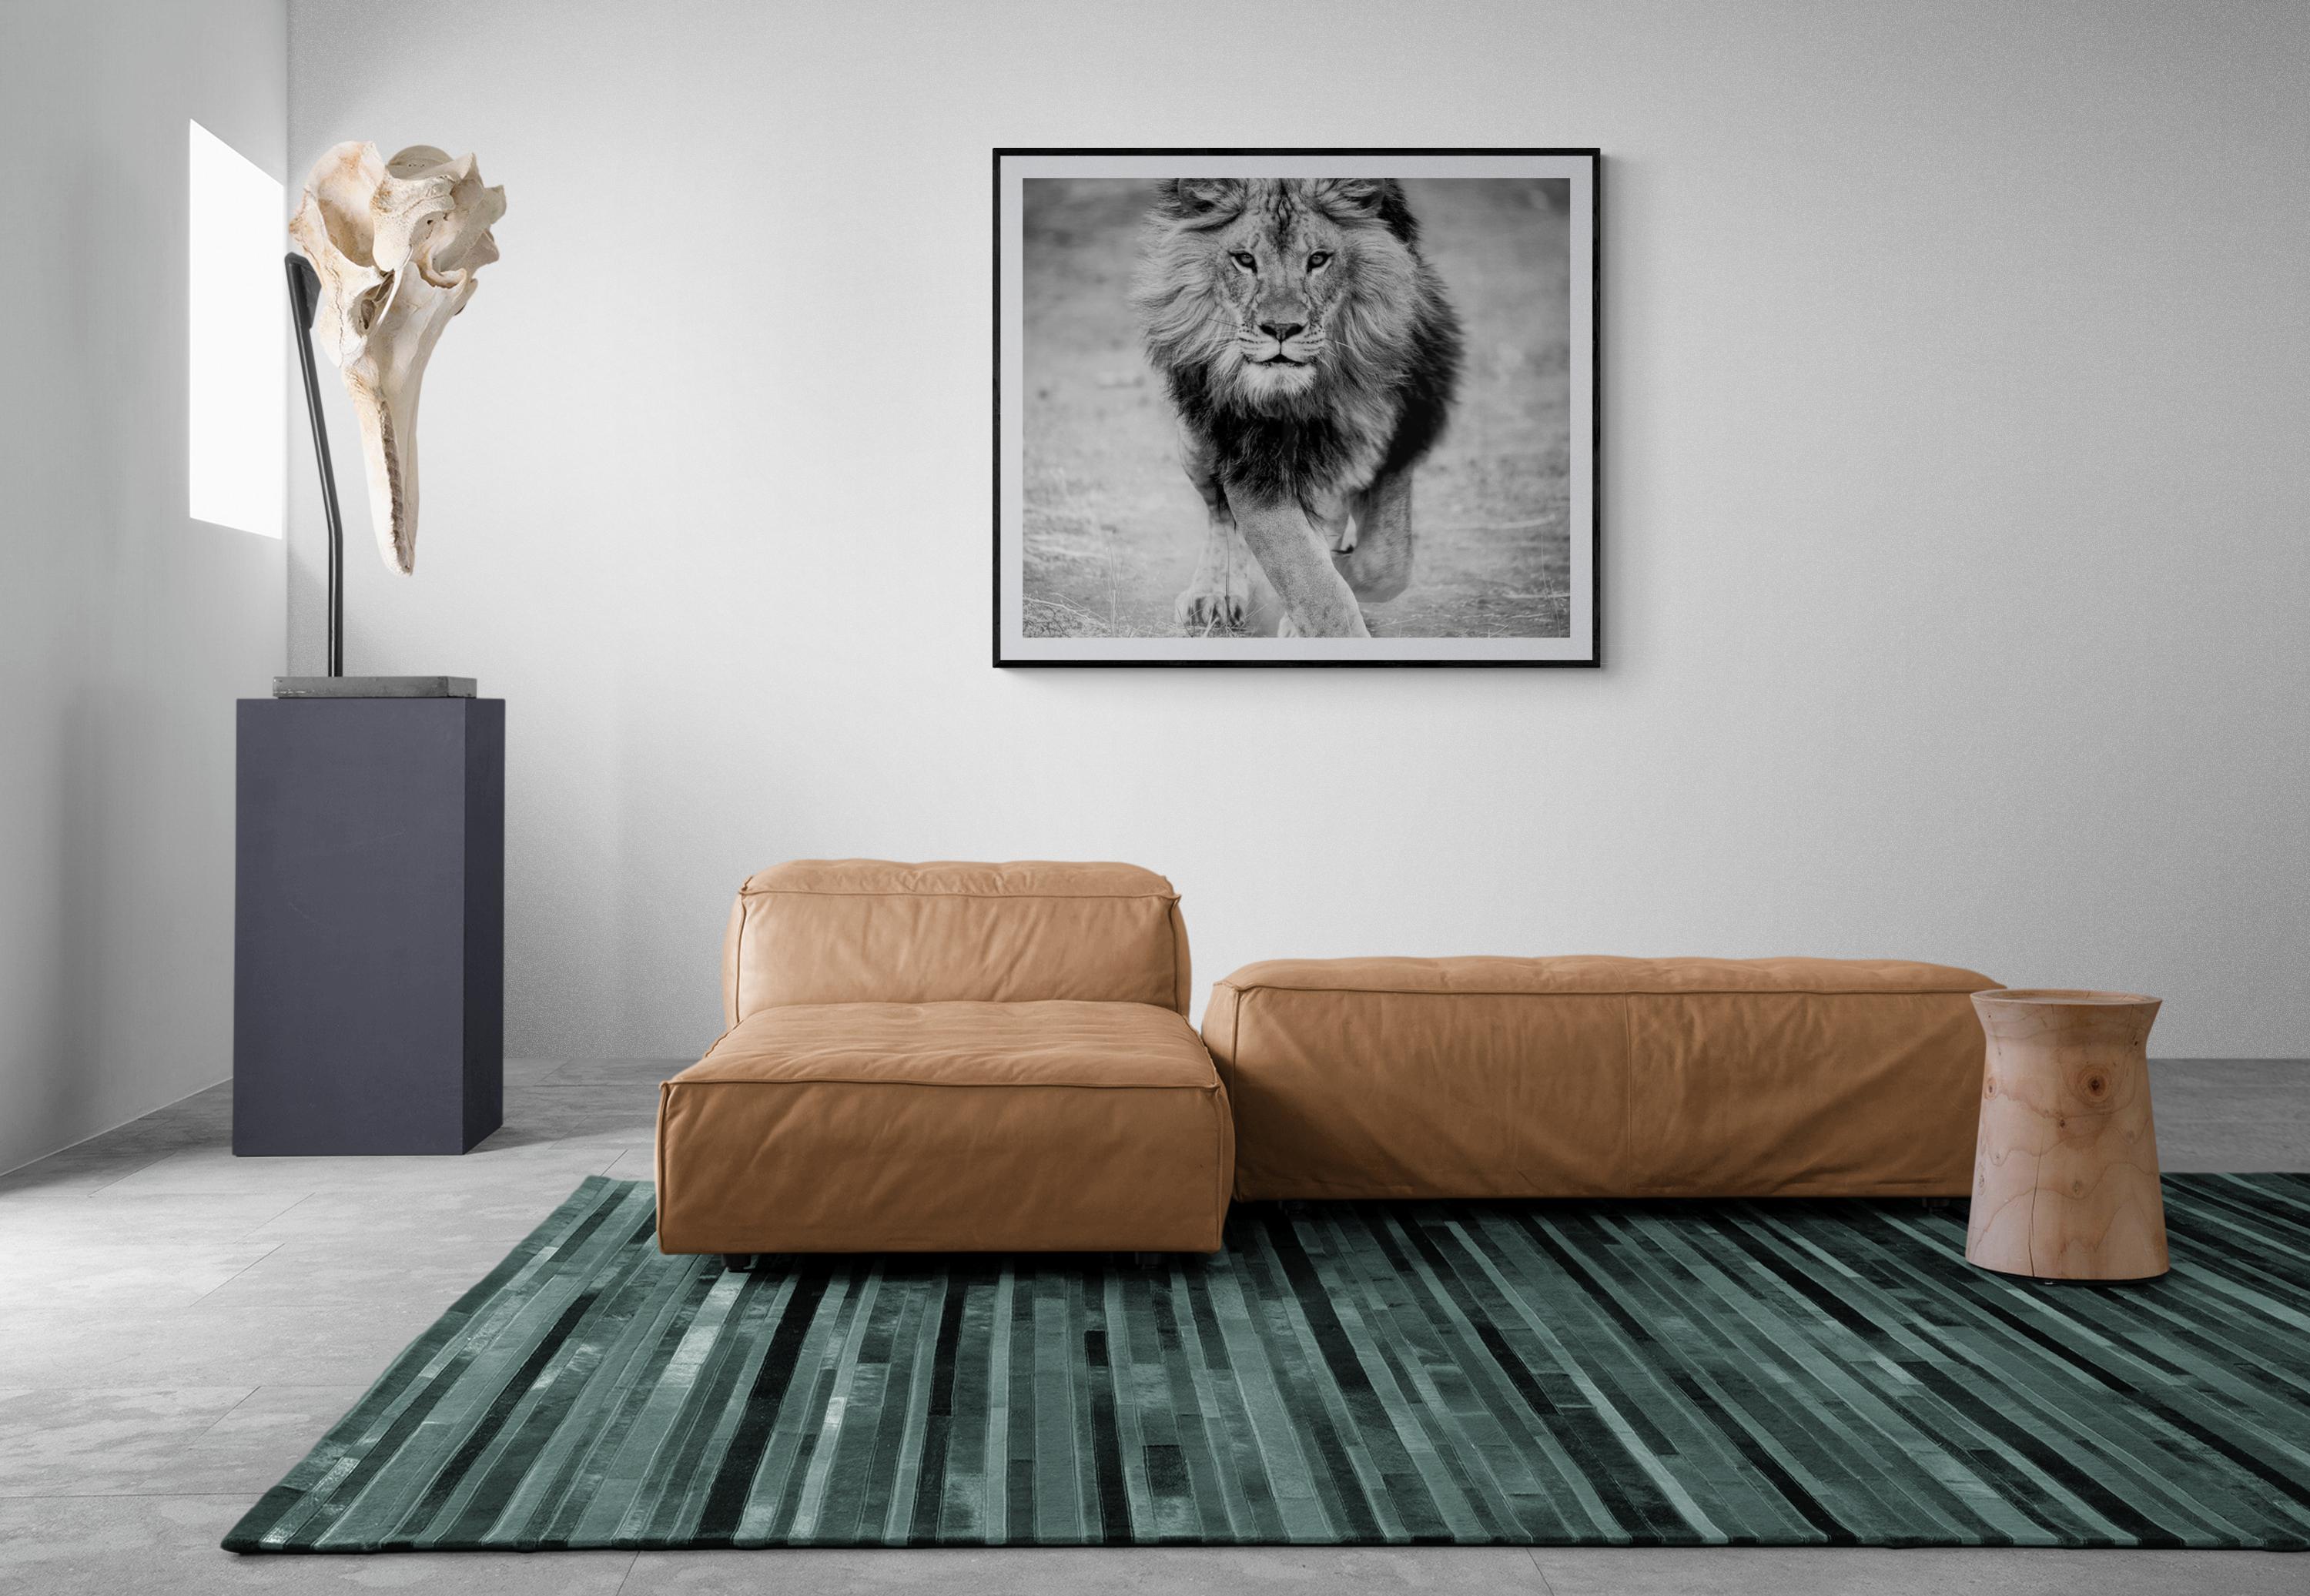 Panthera Leo - 40x60, Black and White Lion Photograph, Lion Photography Unsigned 2